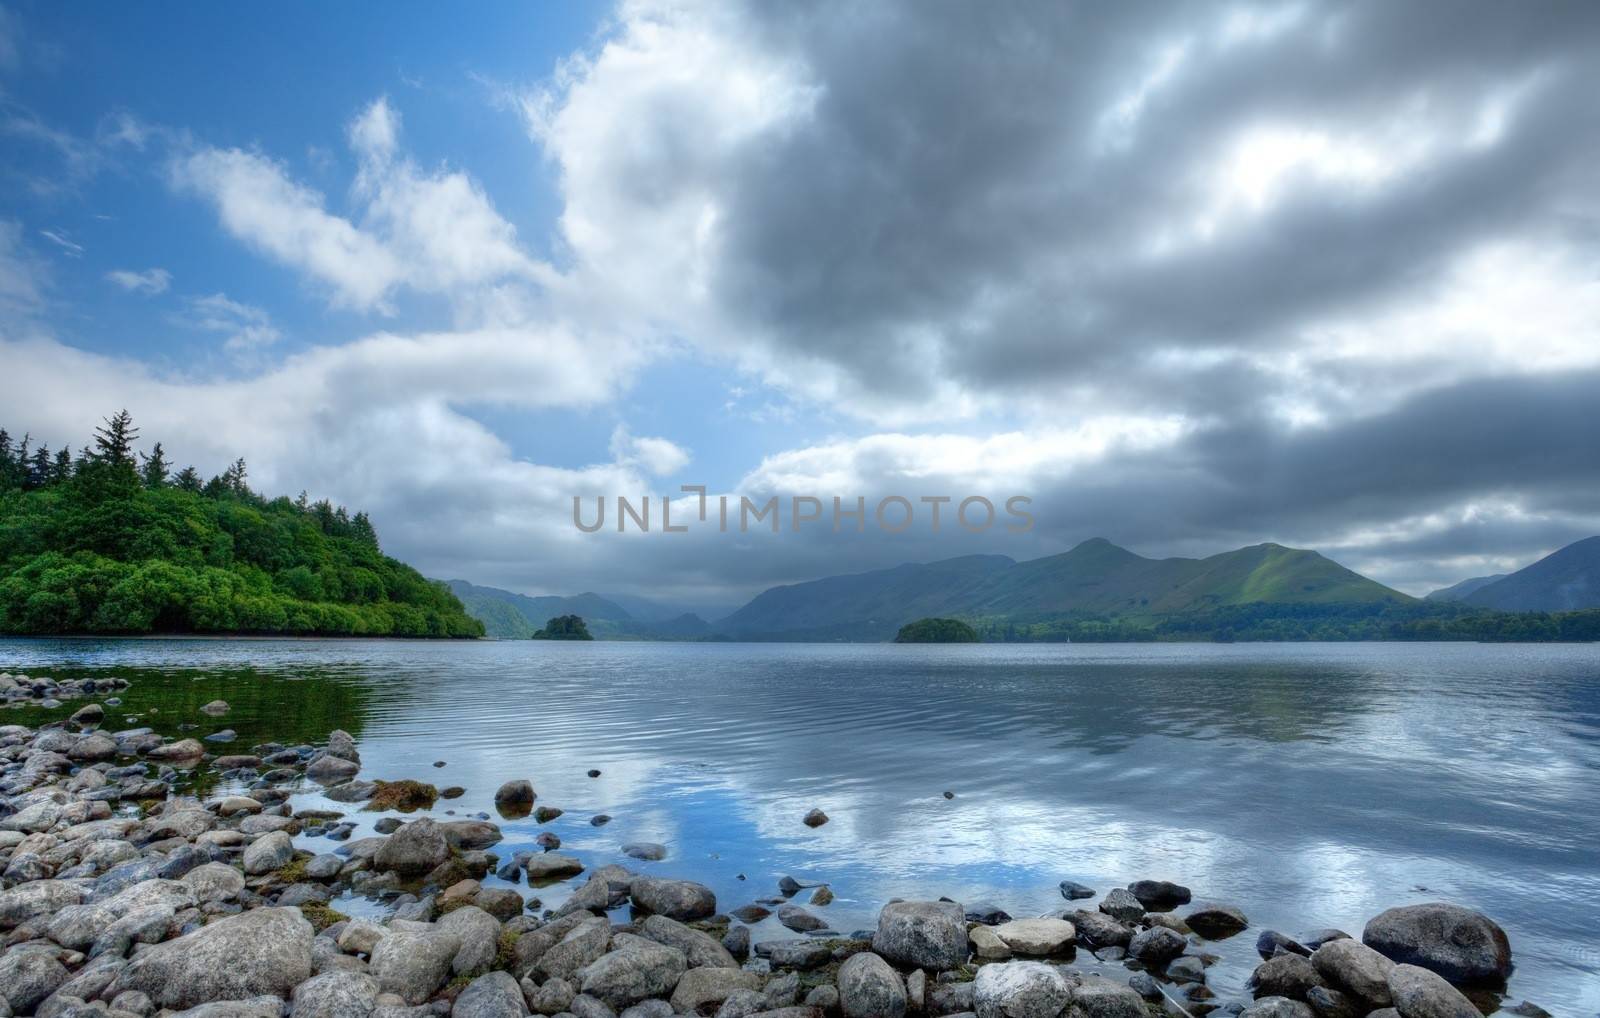 Summertime at Derwent Water near the Cumbrian town of Keswick, the Lake District, England.